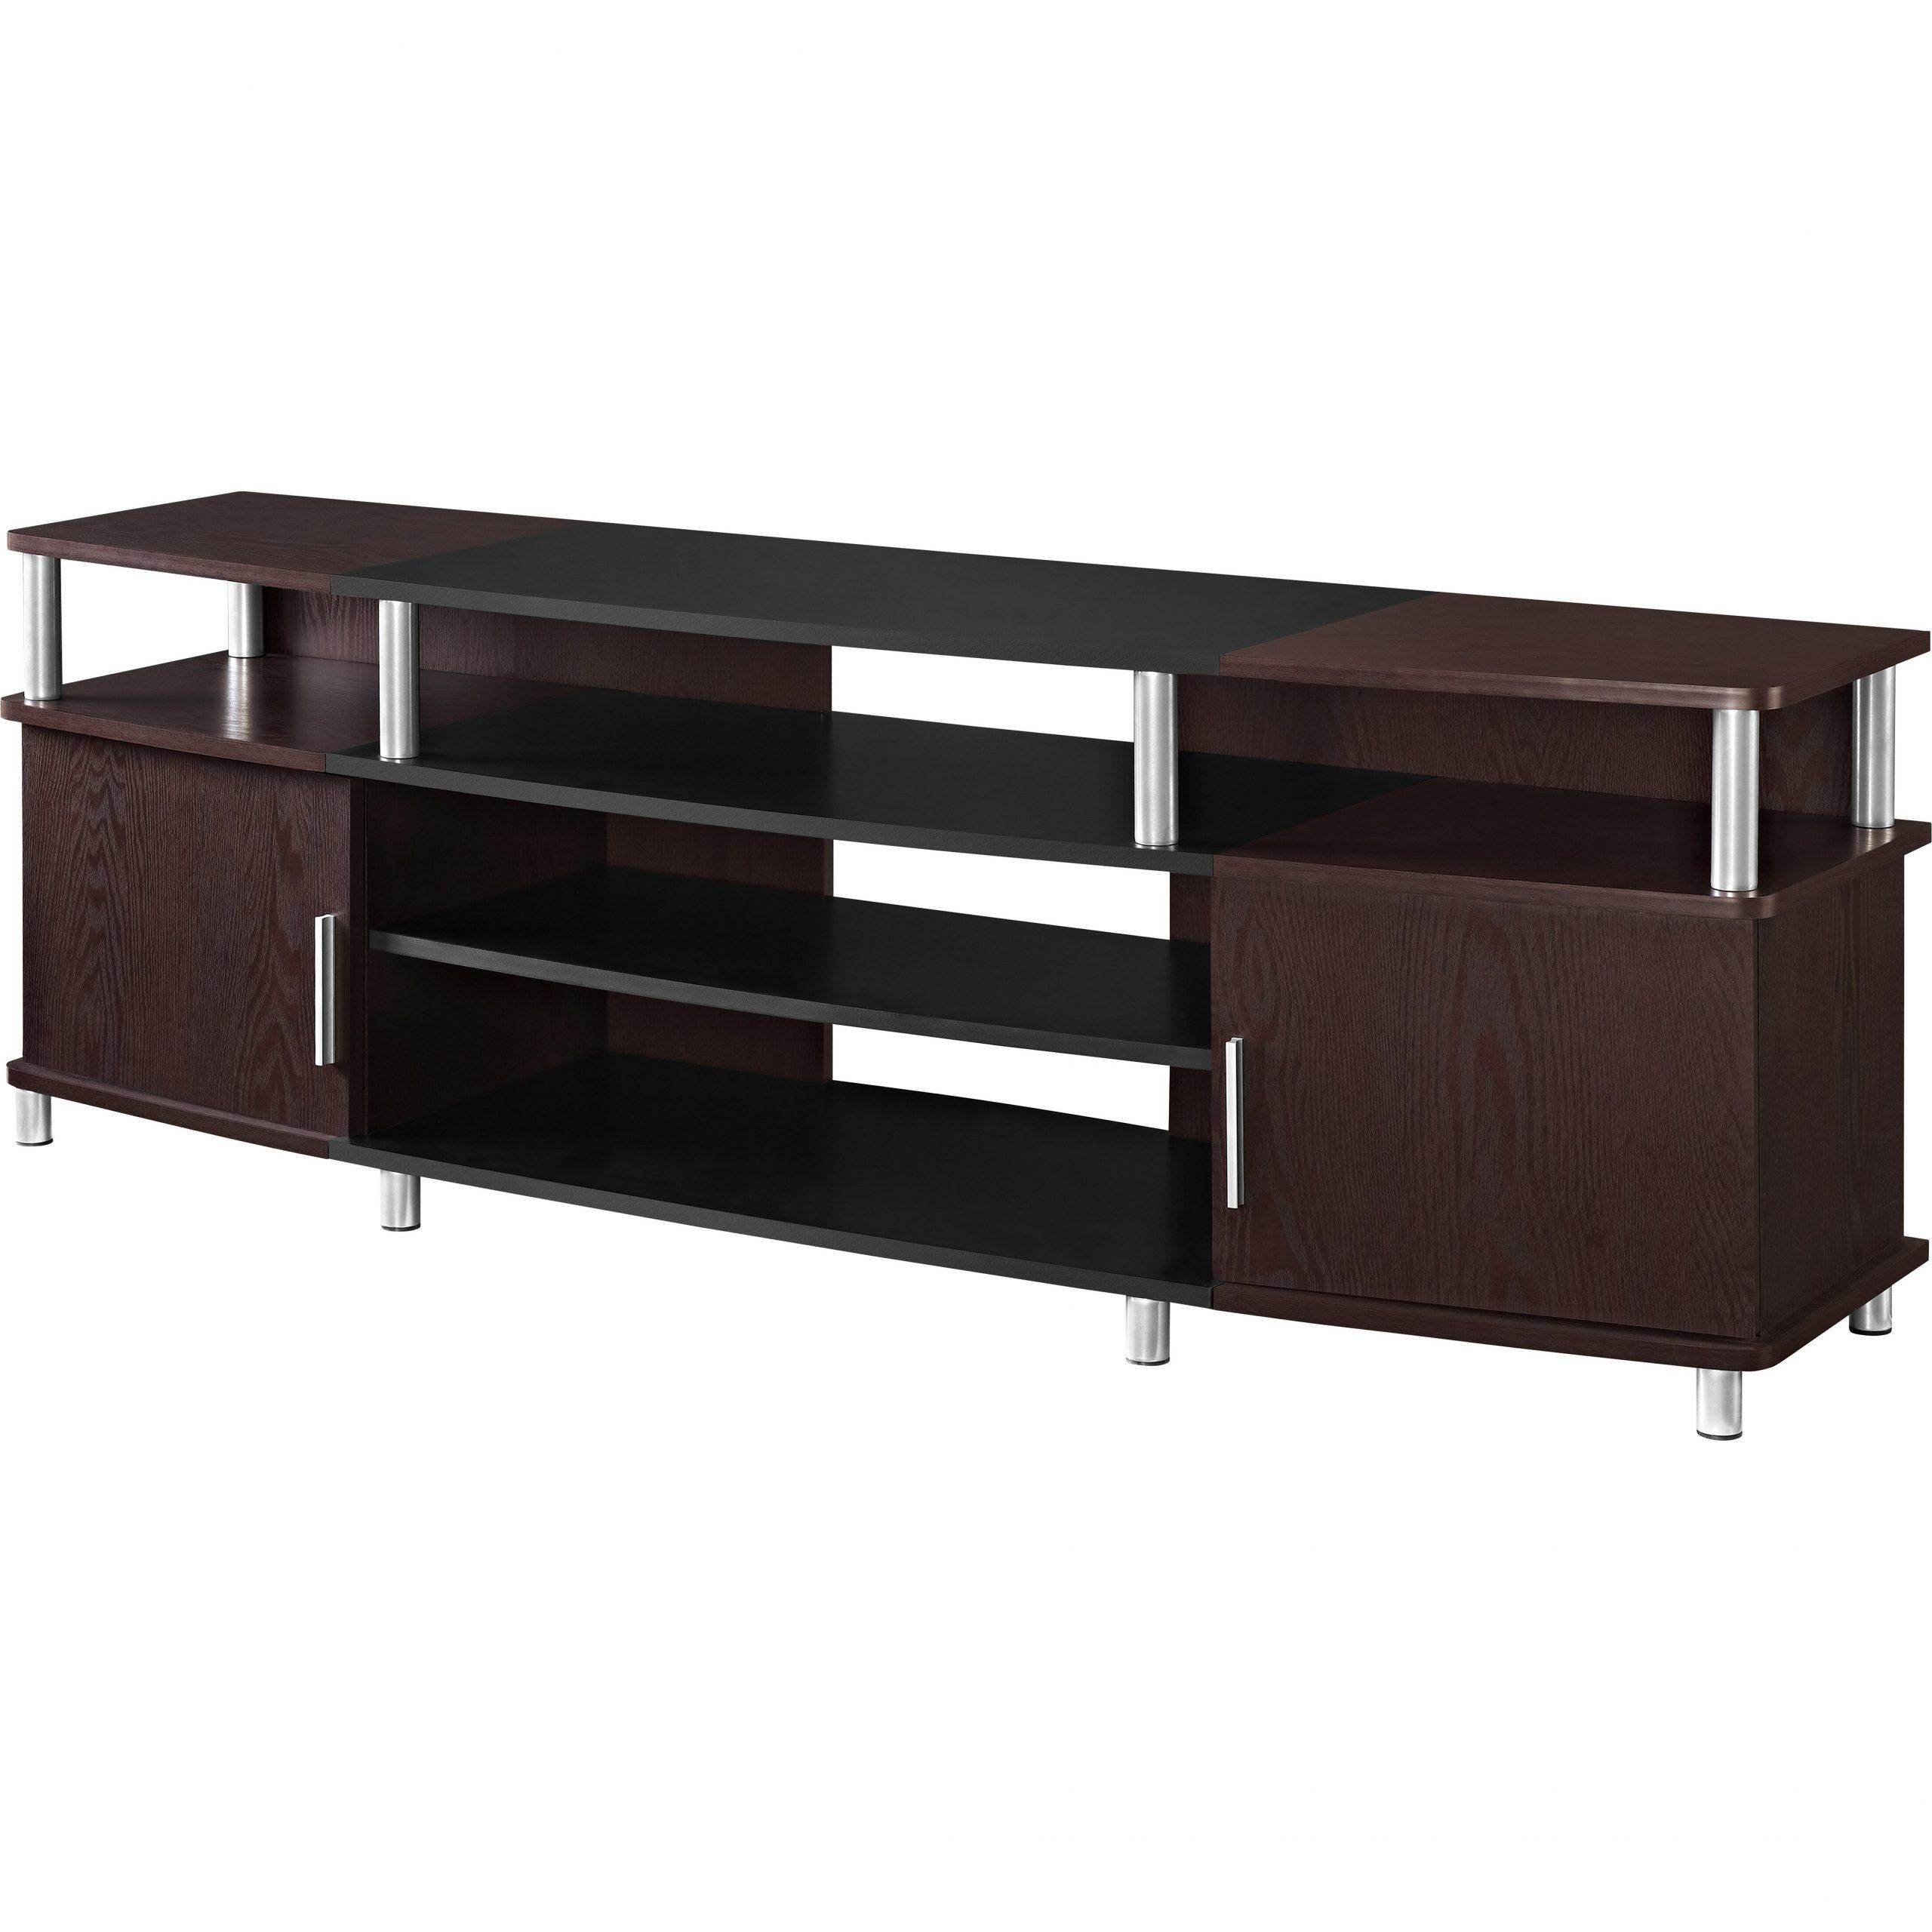 Altra Carson Tv Stand & Reviews | Wayfair With Carson Tv Stands In Black And Cherry (View 8 of 20)